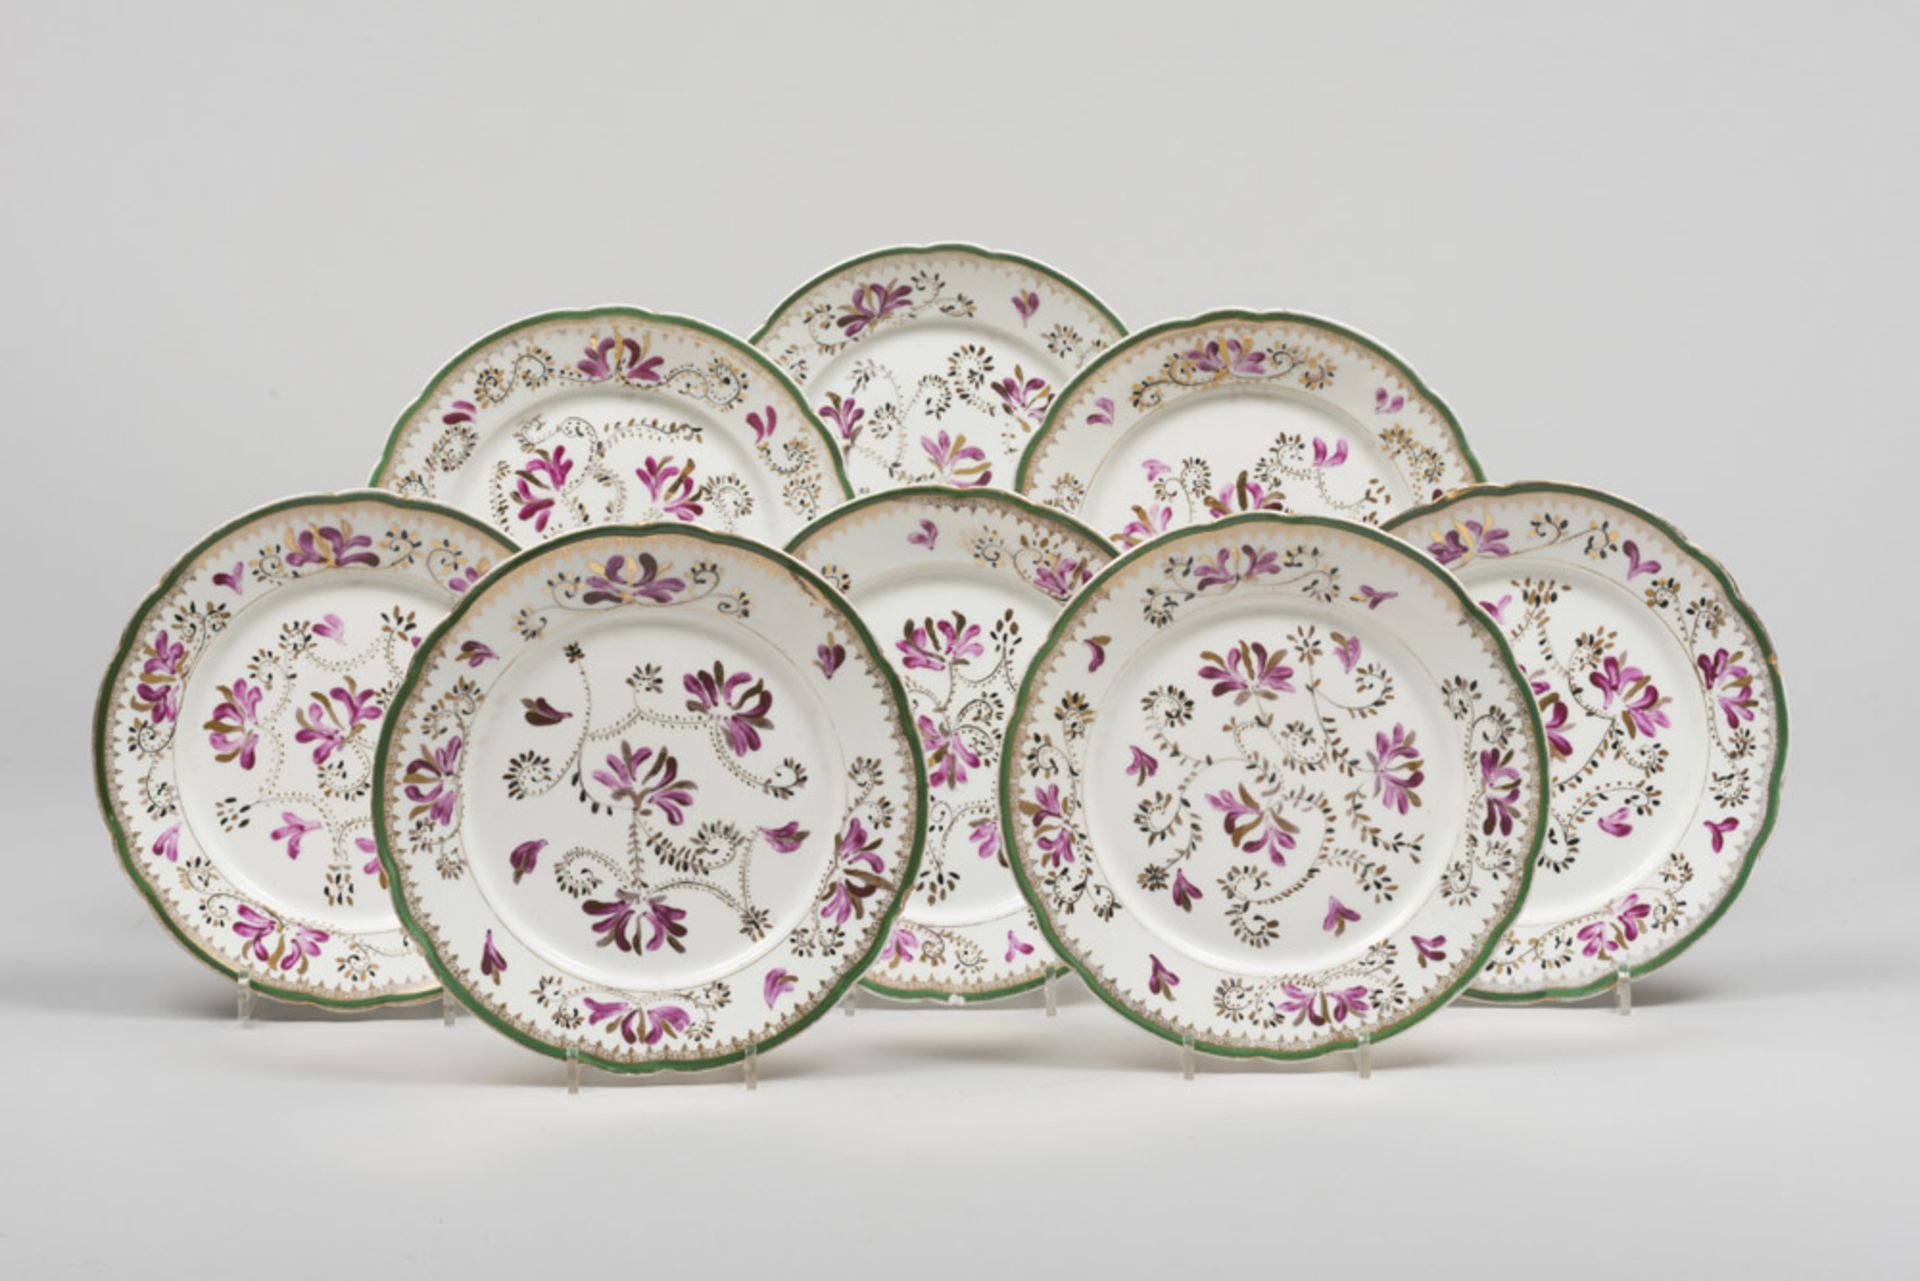 EIGHT BEAUTIFUL PORCELAIN DISHES, GINORI EARLY 20TH CENTURY in white enamel with decorums to flowers